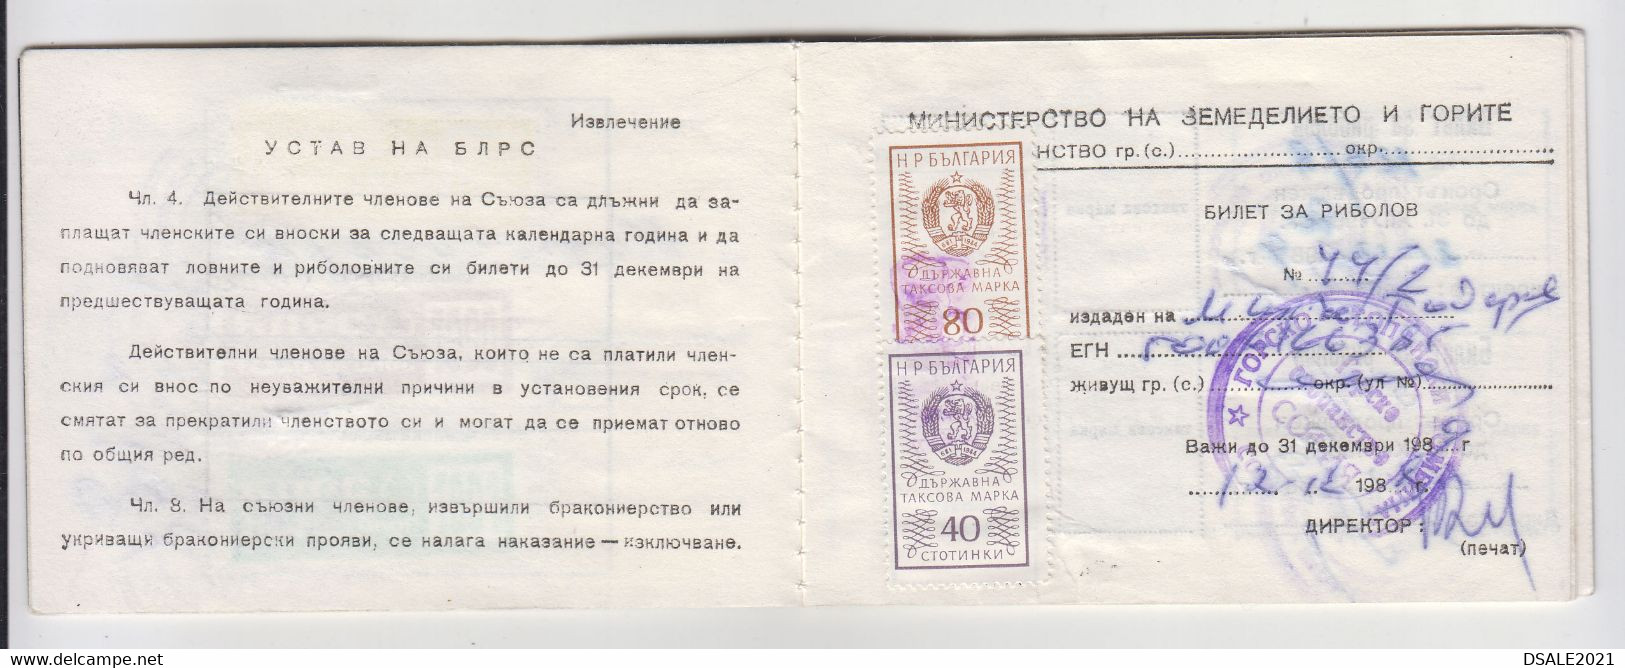 Bulgaria Bulgarie Bulgarije 1989/91 Bulgarian Hunting Fishing License Booklet With Fiscal Revenue Stamps Rare (33553) - Covers & Documents